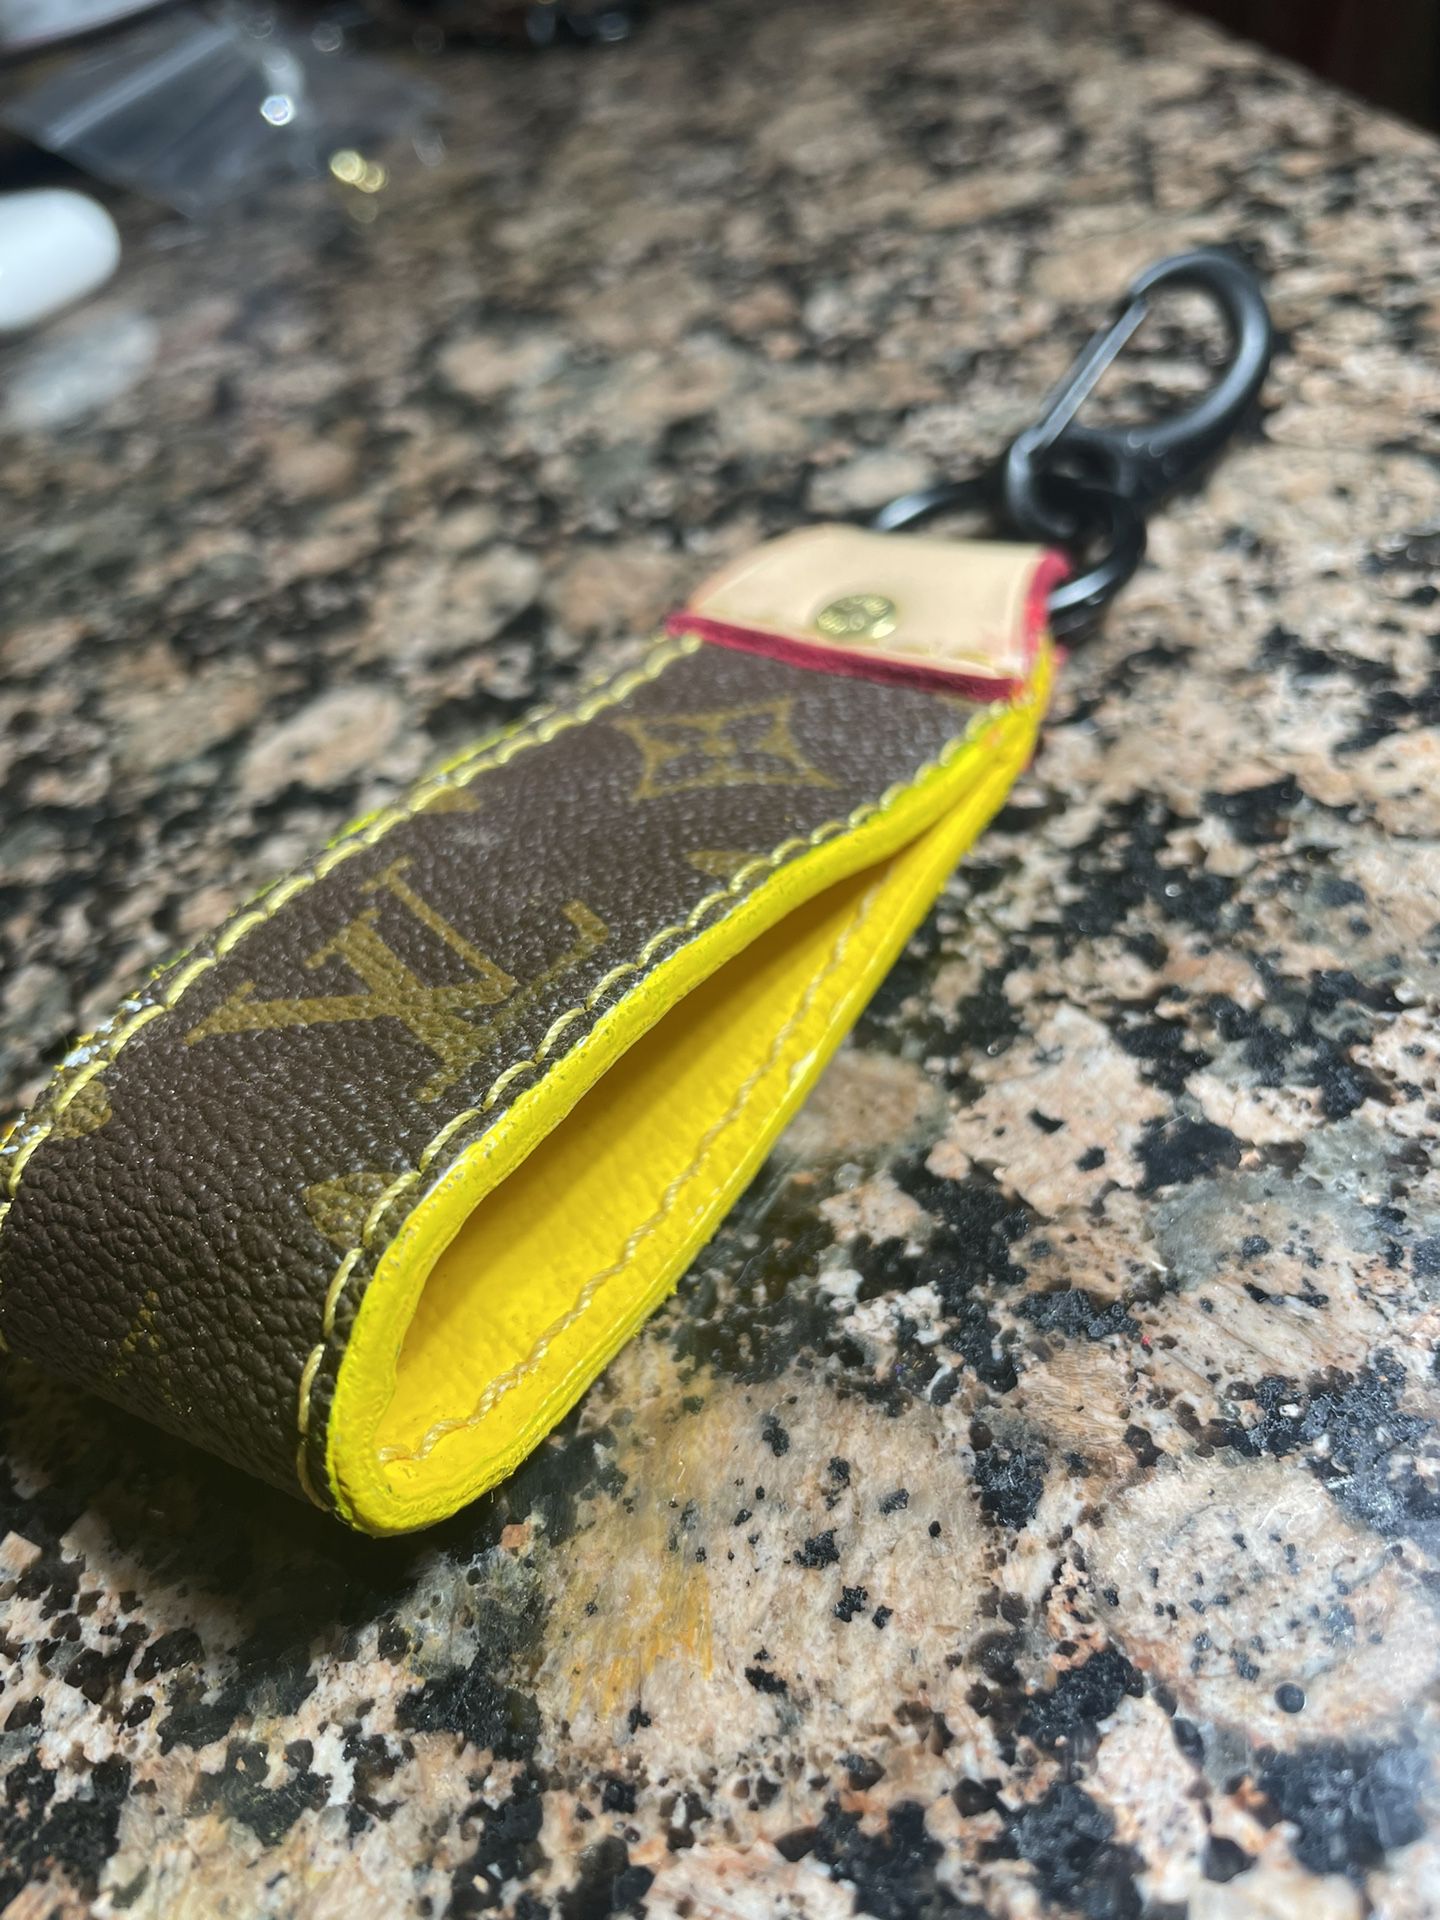 Upcycled LV Key chain wristlet – Anagails